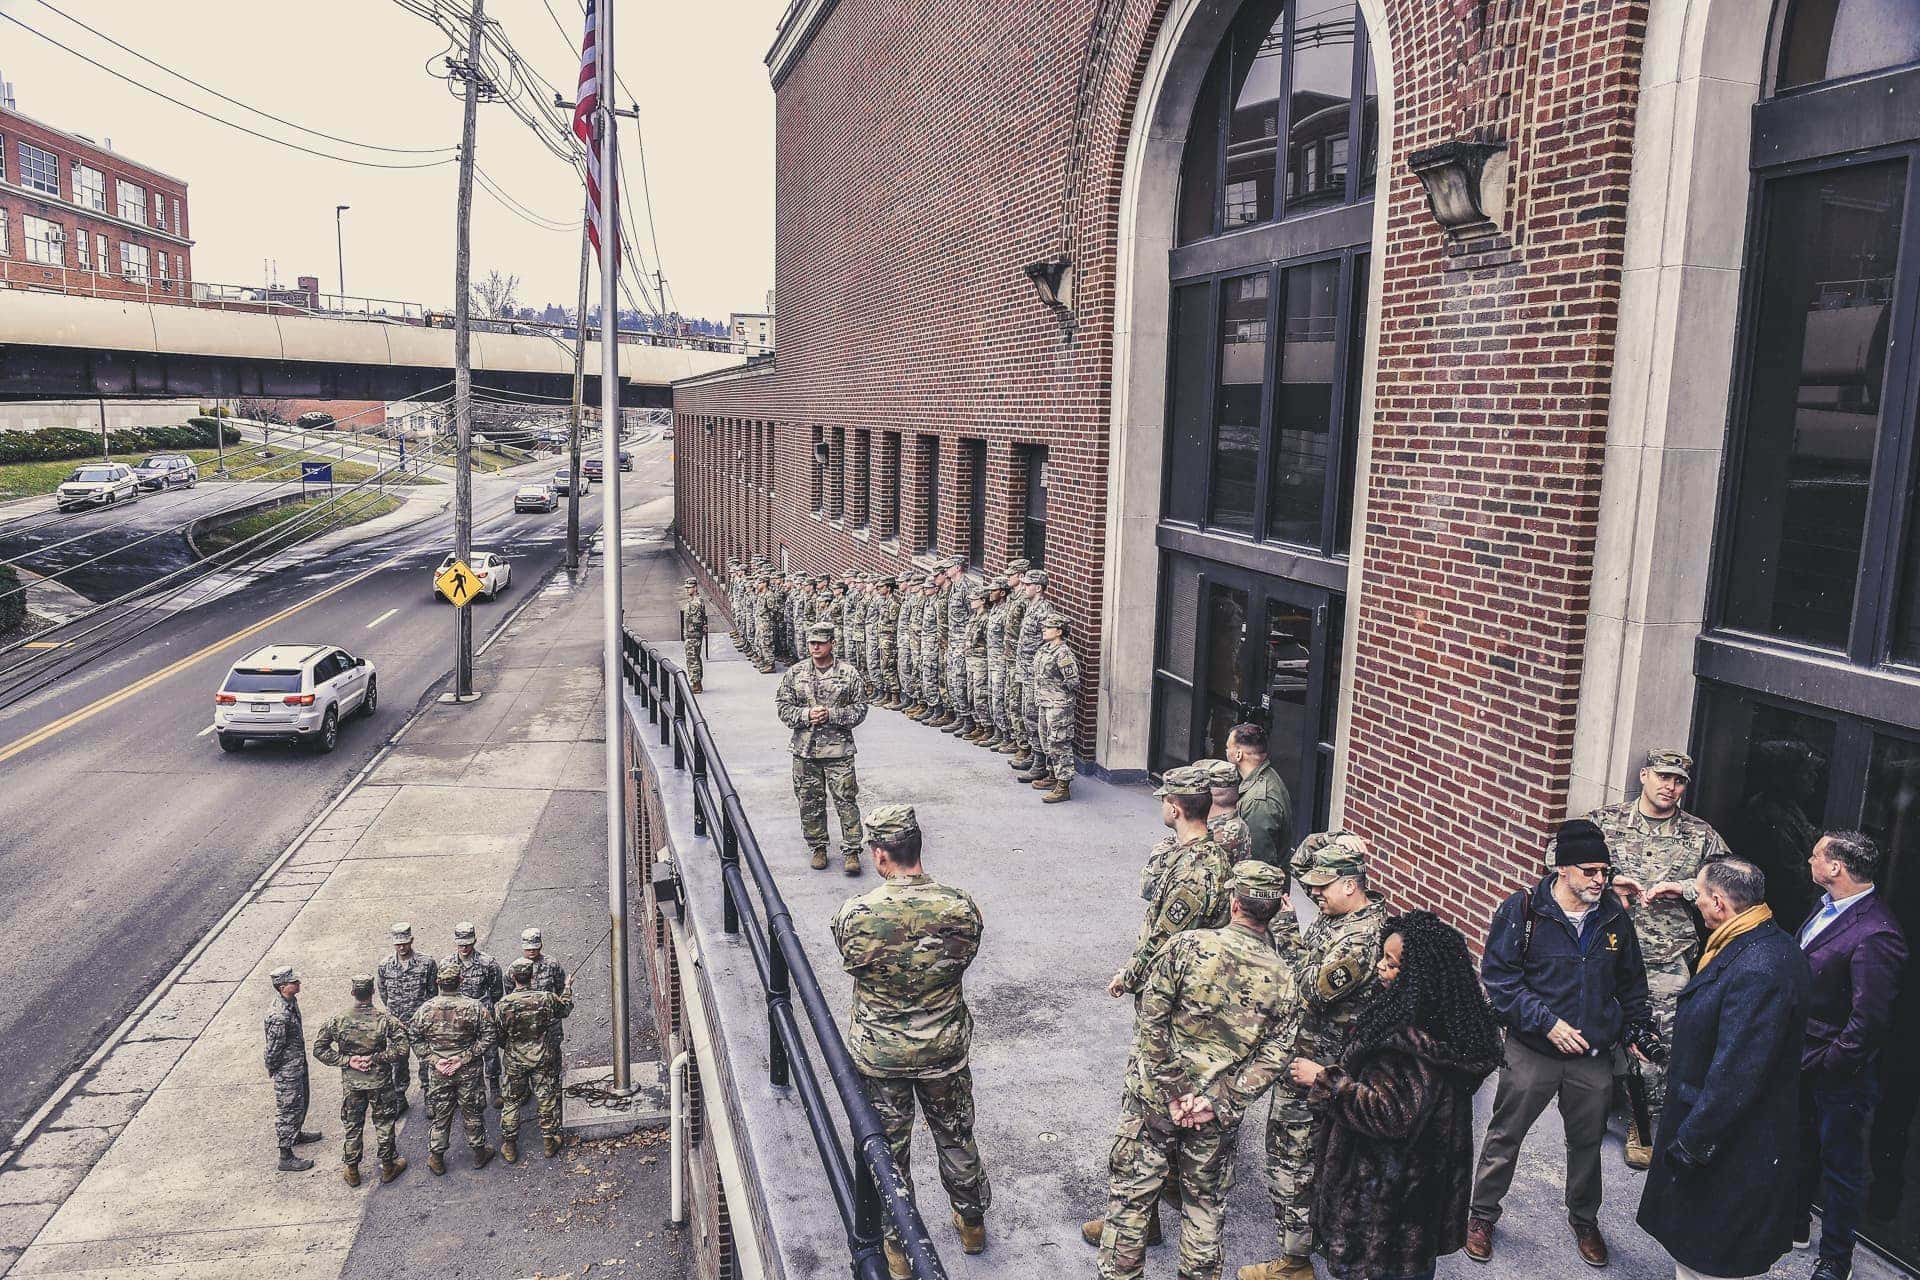 Army and Air Force ROTC were among the denizens of Stansbury Hall since WVU Athletics left in 1970. WVU will begin demolition there this summer.